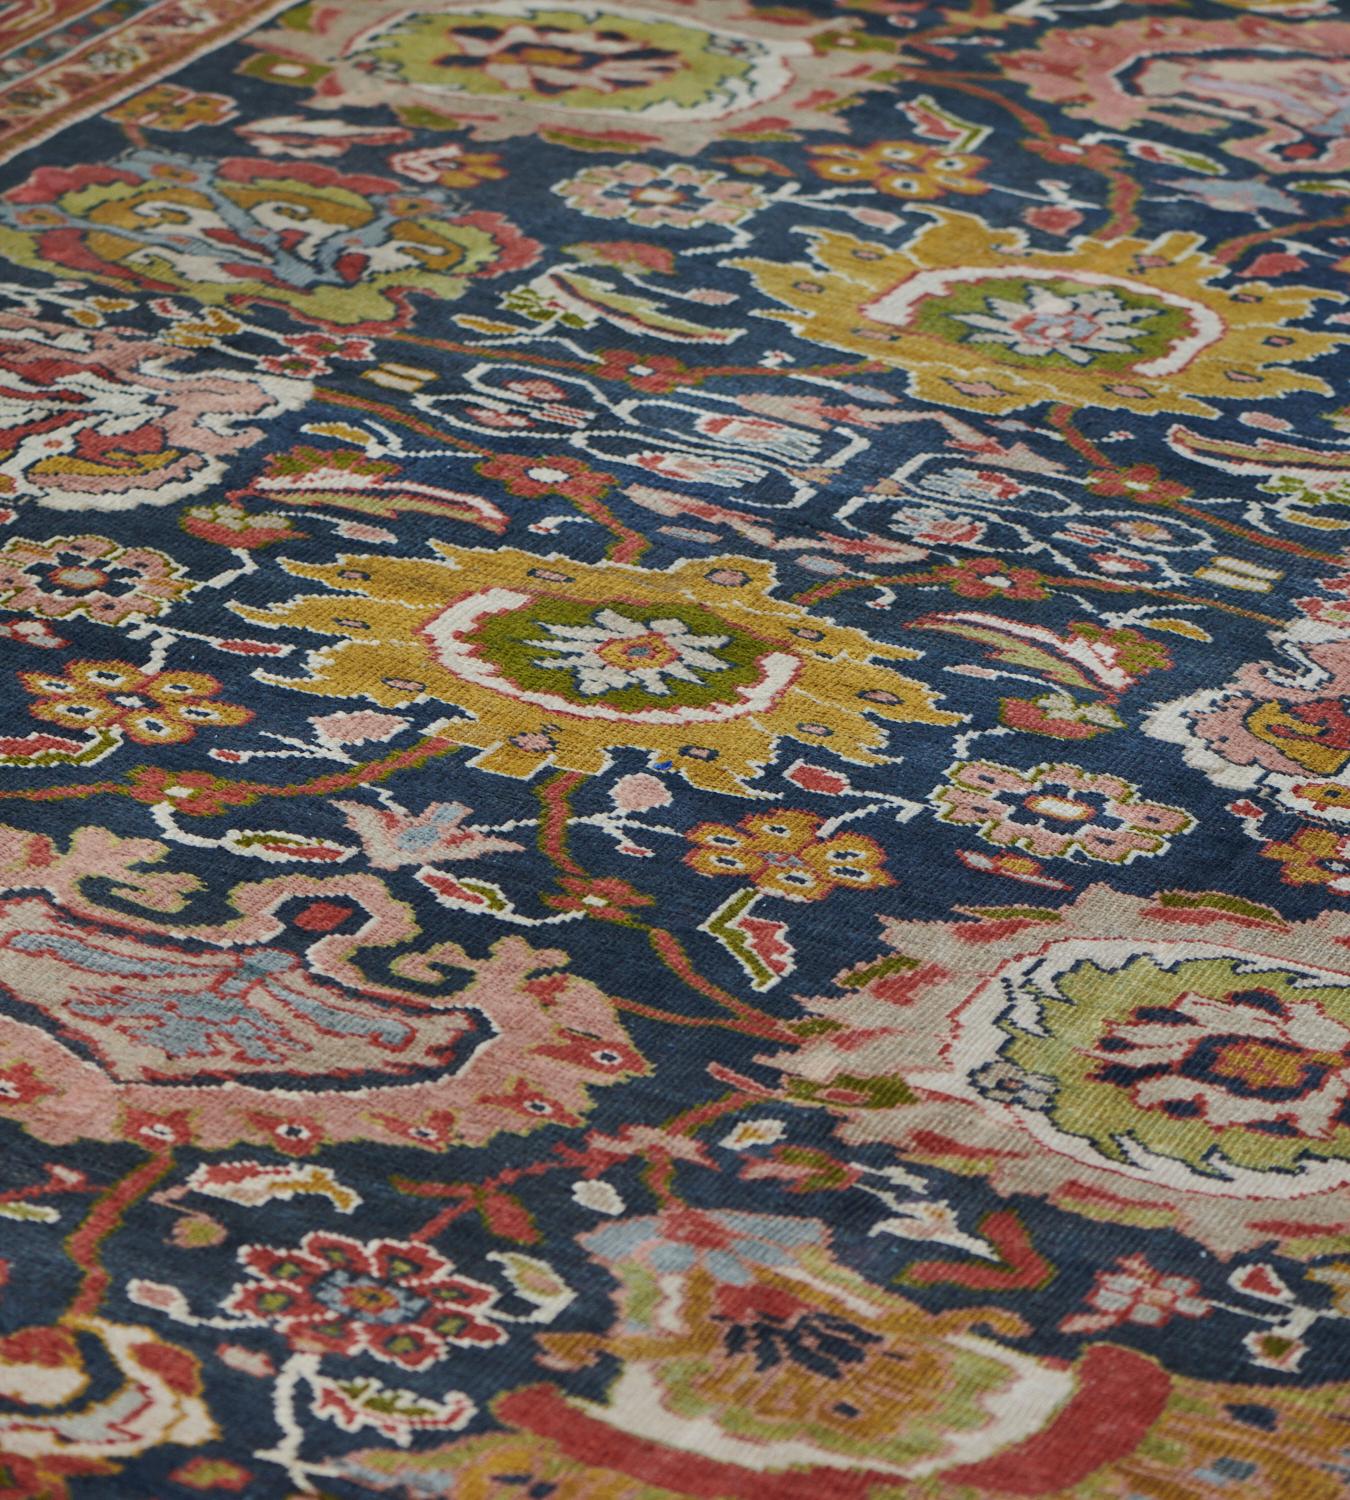 This antique Ziegler carpet has a shaded royal-blue field with an overall design of bold polychrome palmettes around a central column of similar palmettes all linked by a scrolling floral and leafy vine, in a brick-red border of lime-green and